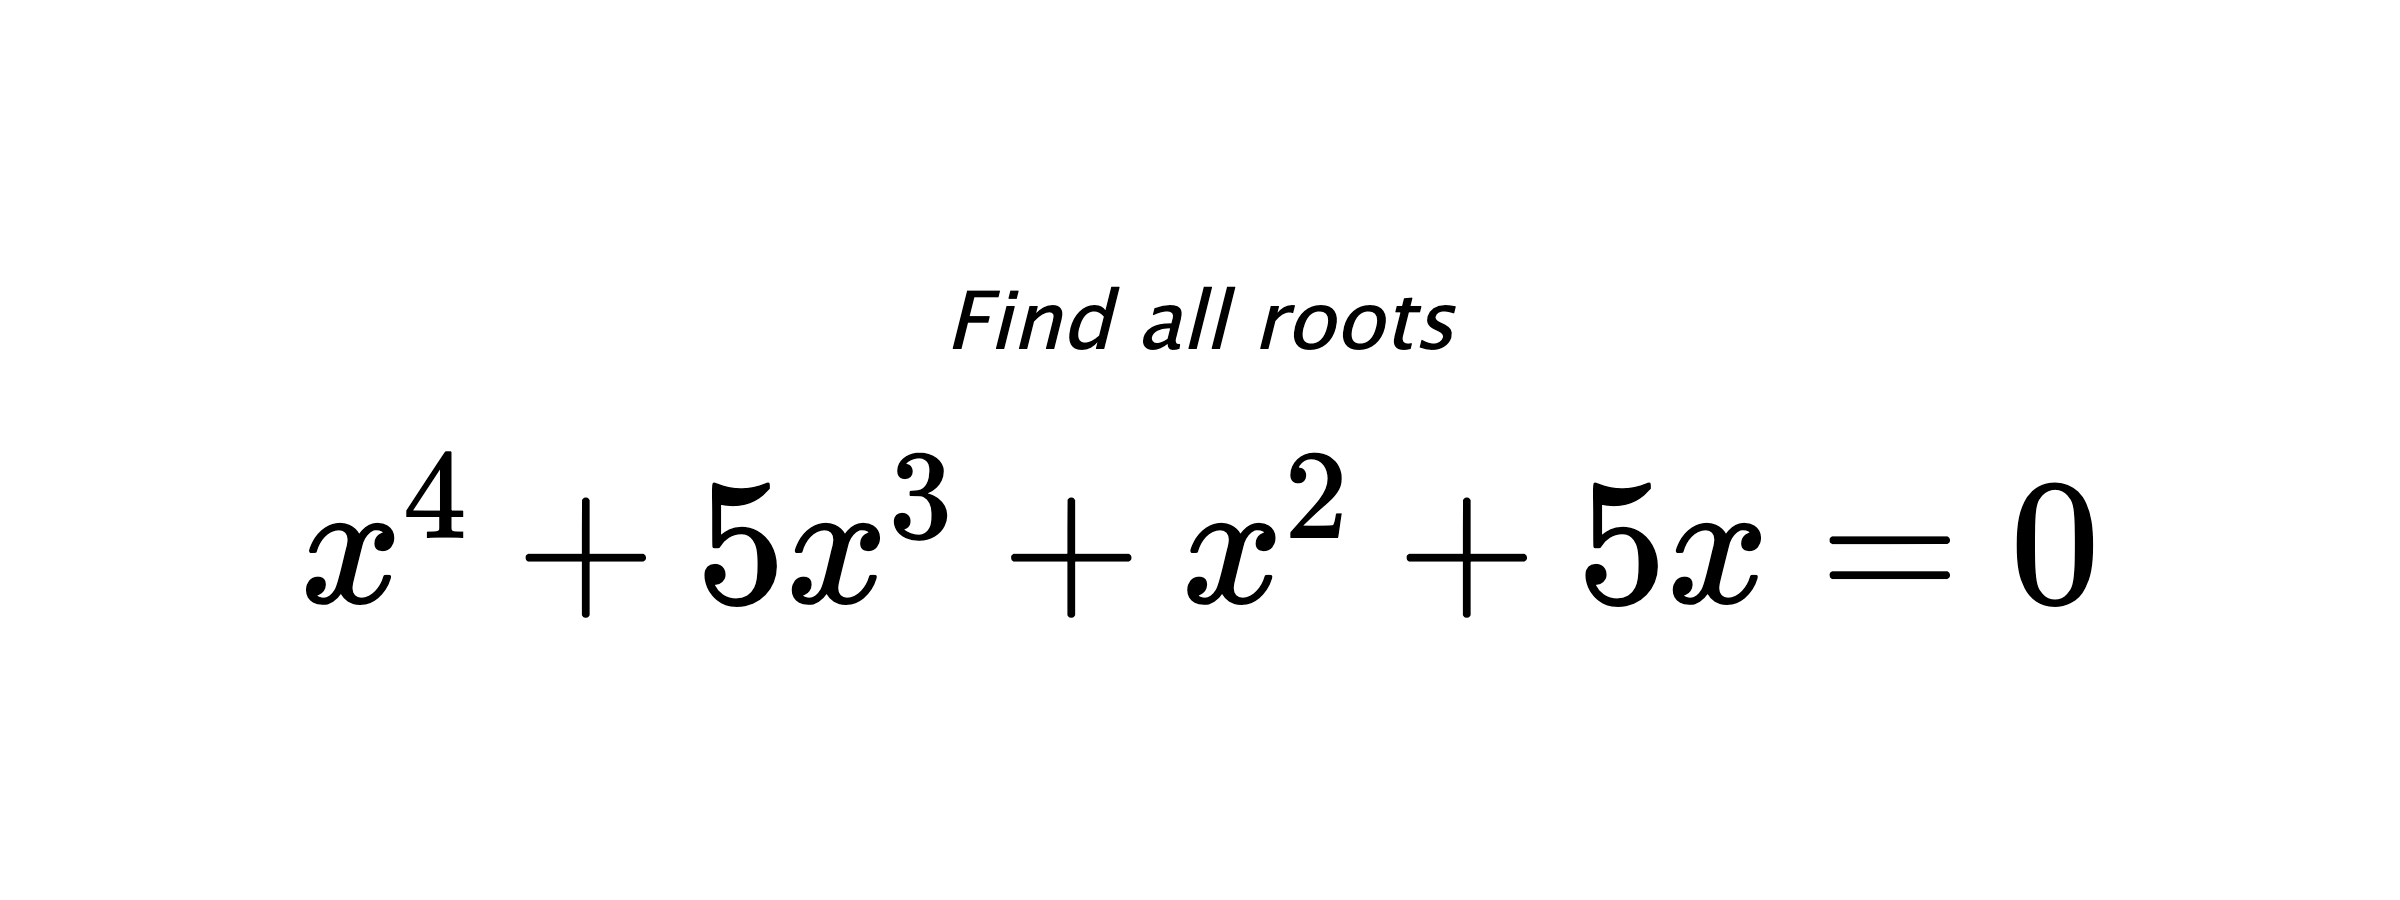 Find all roots $ x^{4}+5x^{3}+x^{2}+5x=0 $